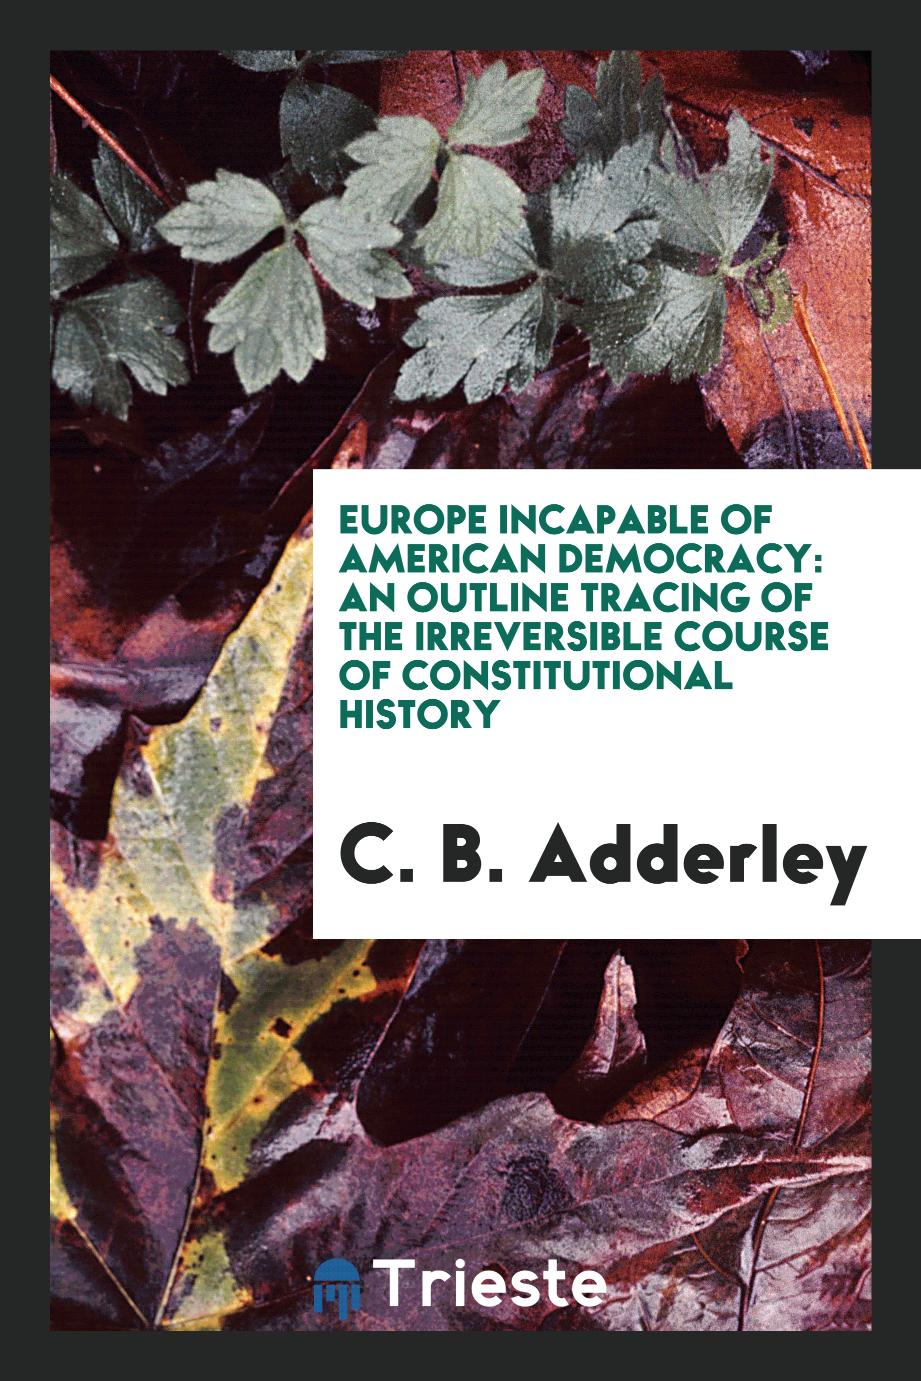 Europe Incapable of American Democracy: An Outline Tracing of the Irreversible Course of constitutional history